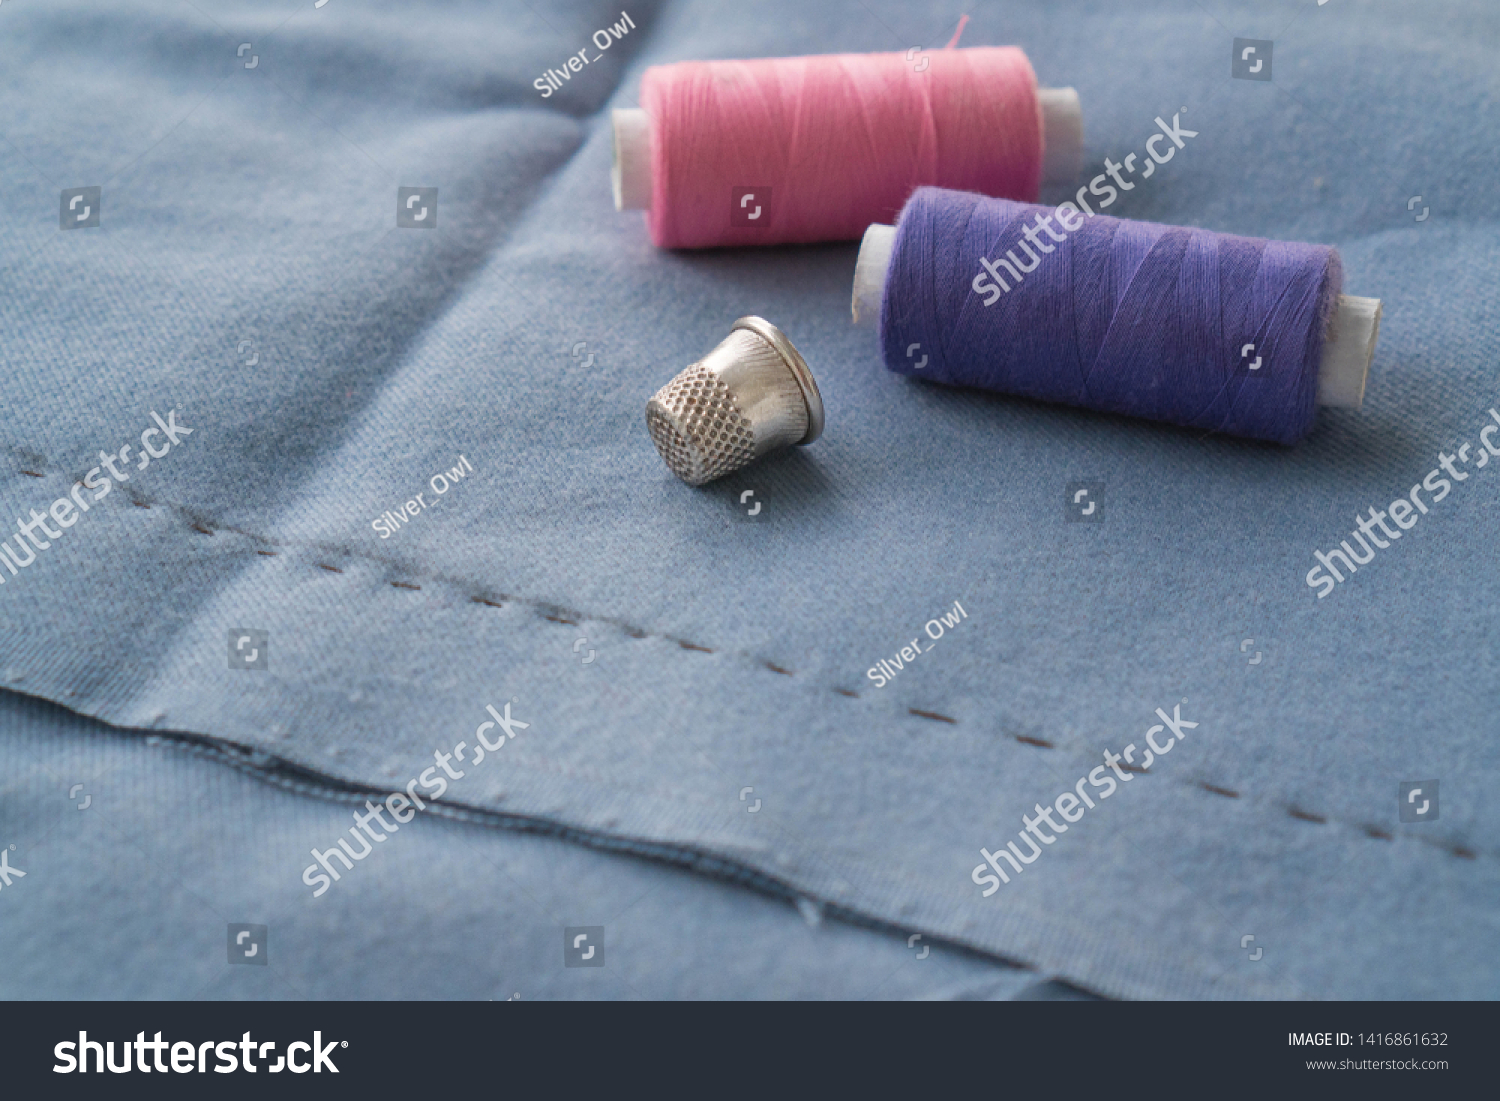 Cut part of skirt with a sewn tuck, thimble and two spools of thread. Two spools of pink and purple threads and tailor tool are lying on the blue basting fabric #1416861632